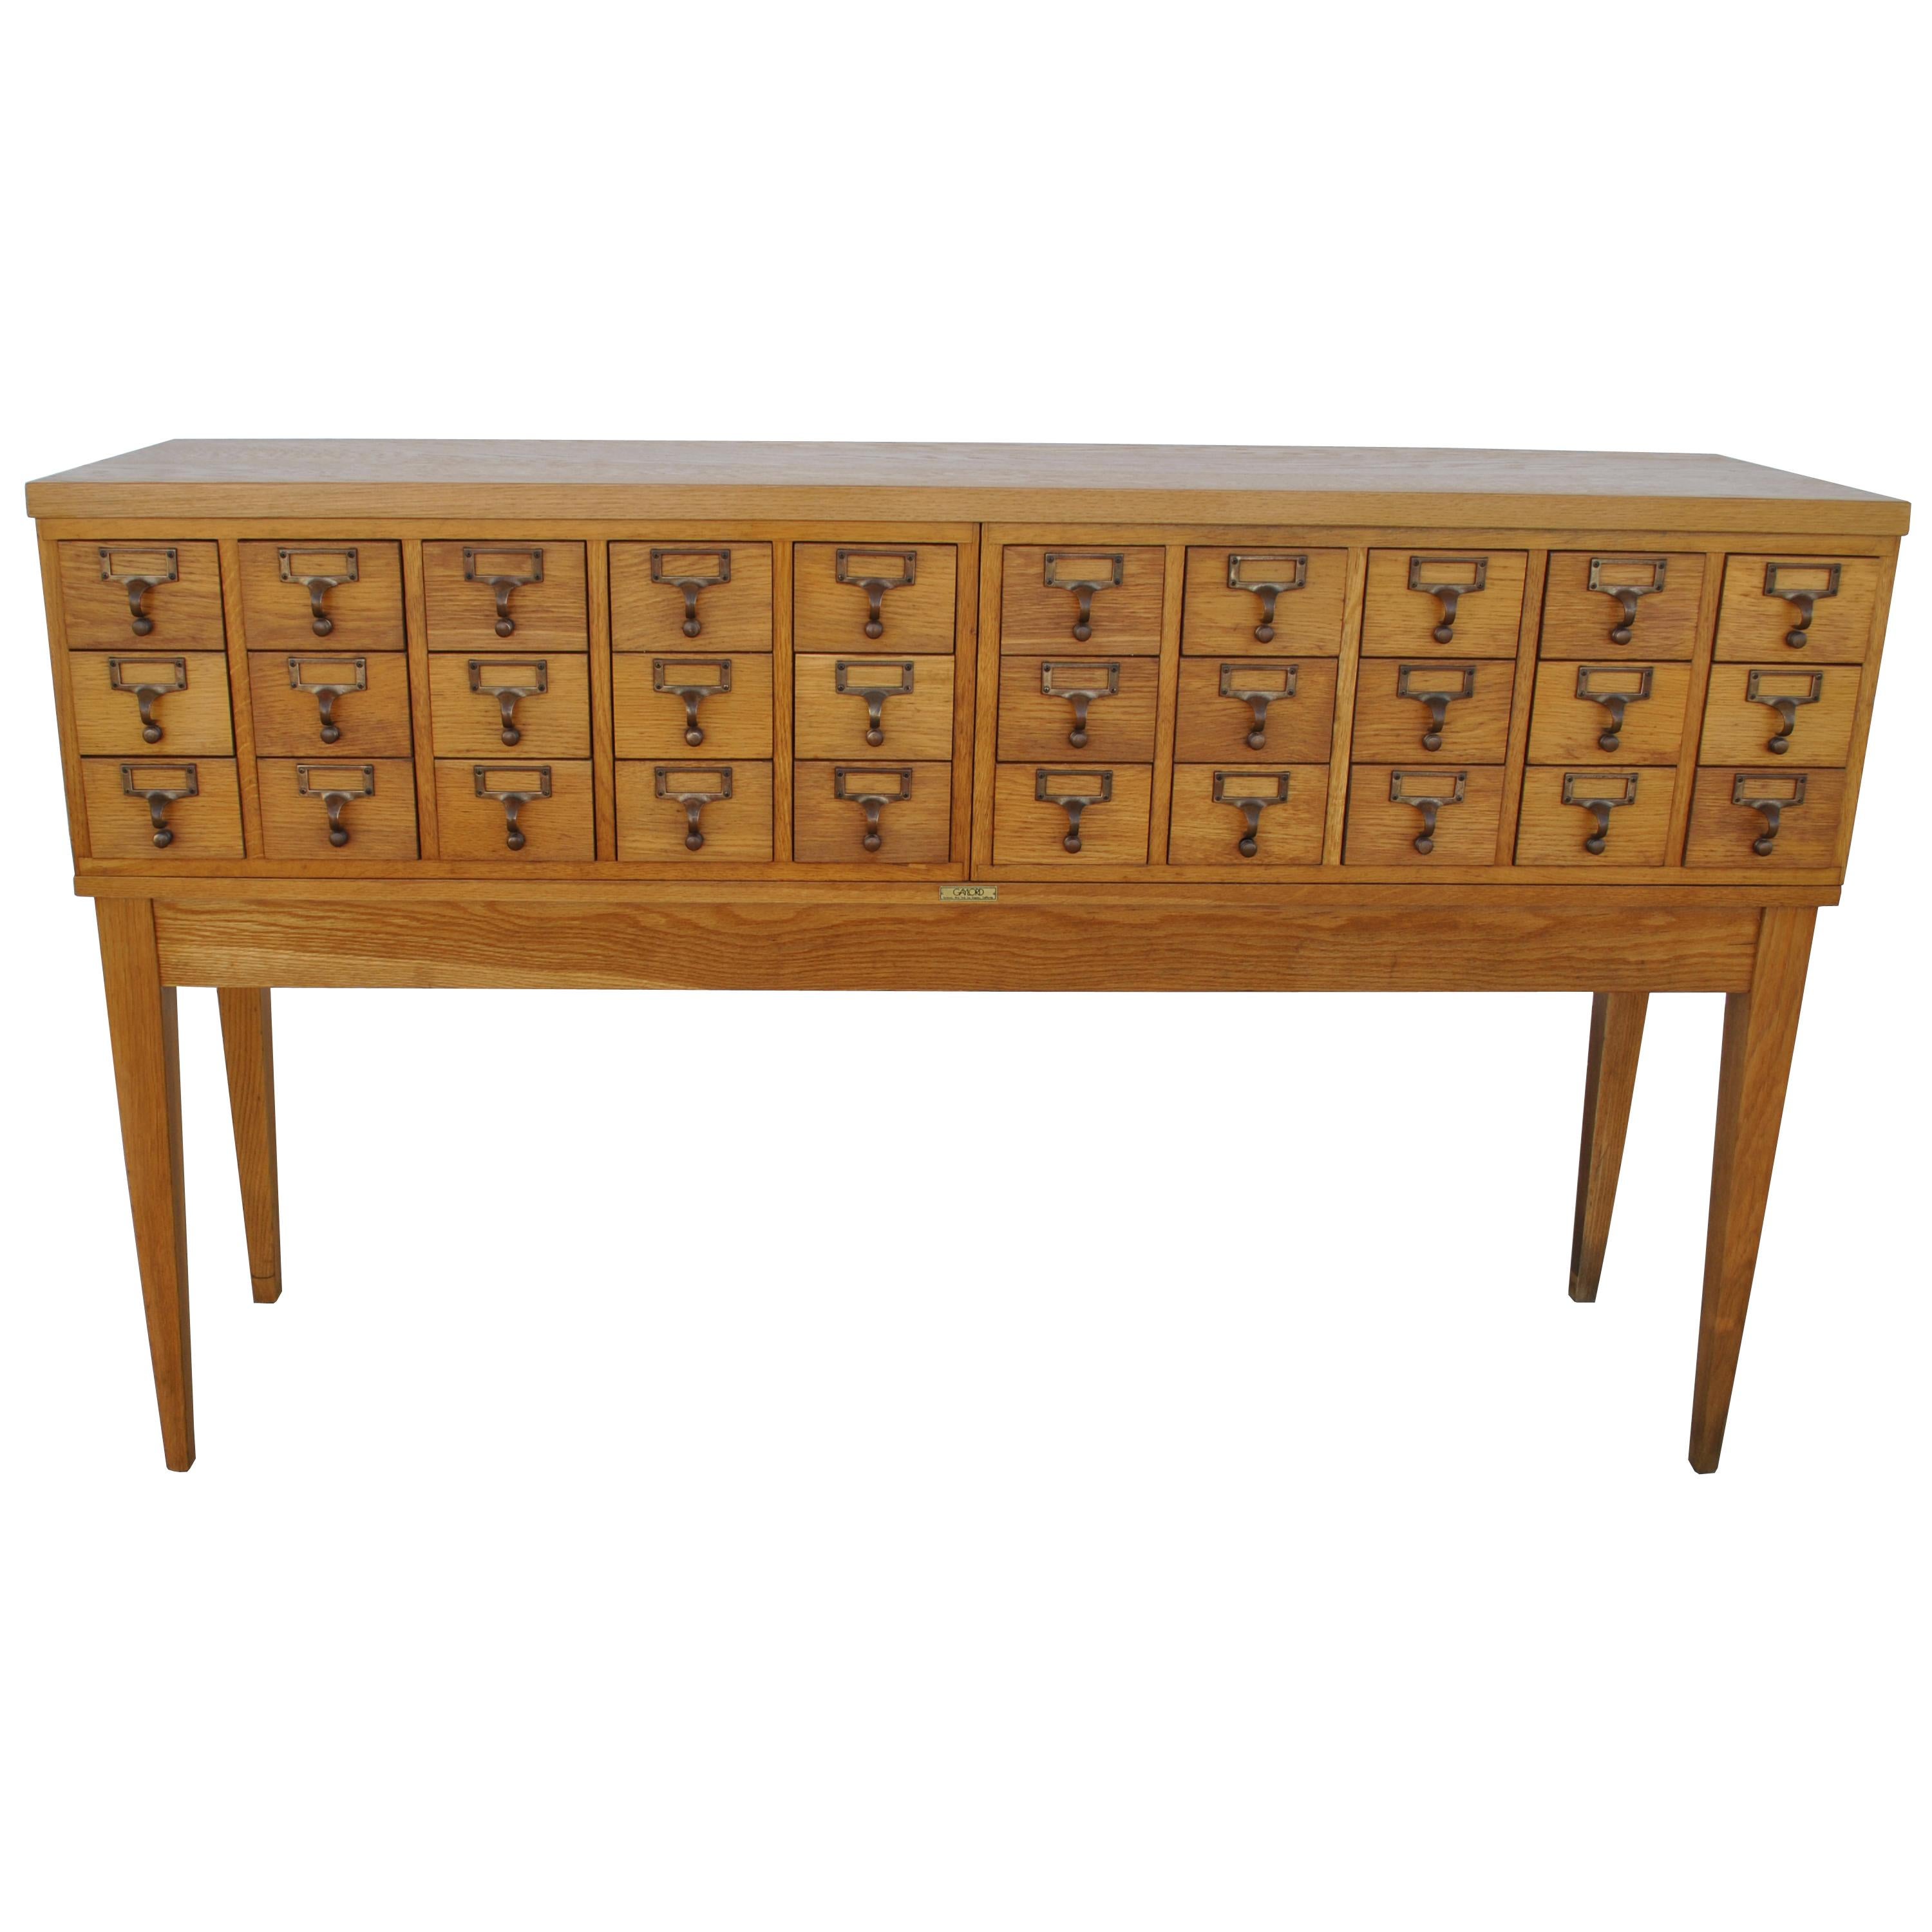 Vintage midcentury oak library card catalog console by Gaylord Co. 


Oak library card catalog console by Gaylord Co. 30 drawers with brass pulls 
Ideal for a console or work table.